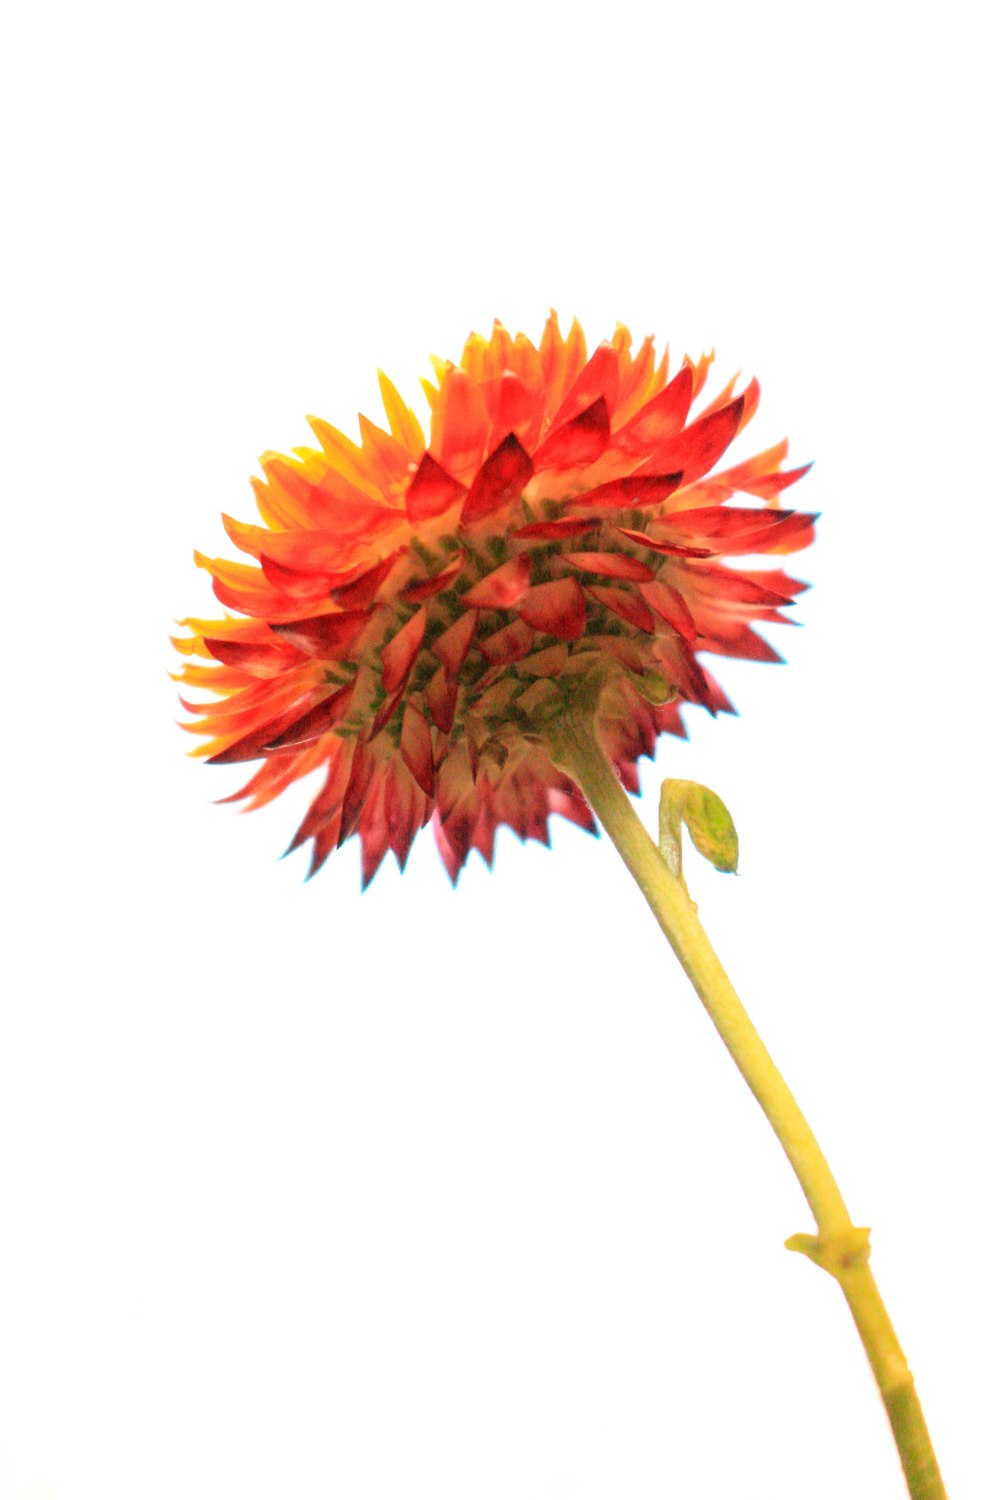 a red and yellow flower on a white background